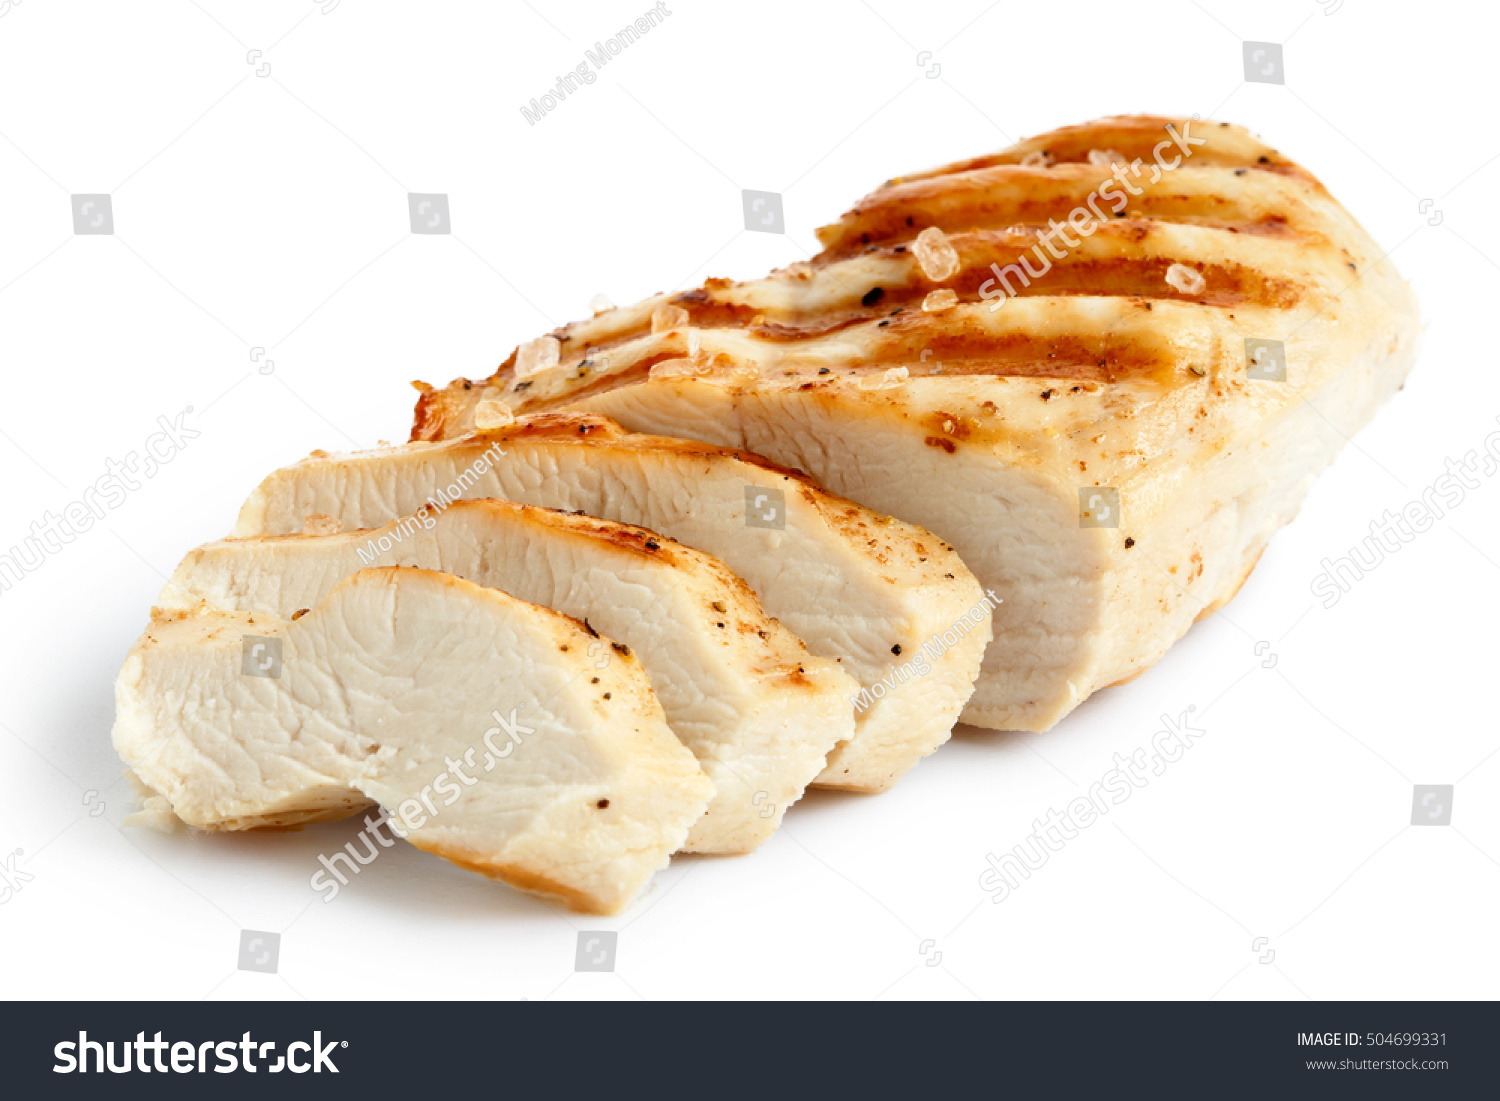 partially sliced grilled chicken breast black stock photo edit now 504699331 https www shutterstock com image photo partially sliced grilled chicken breast black 504699331